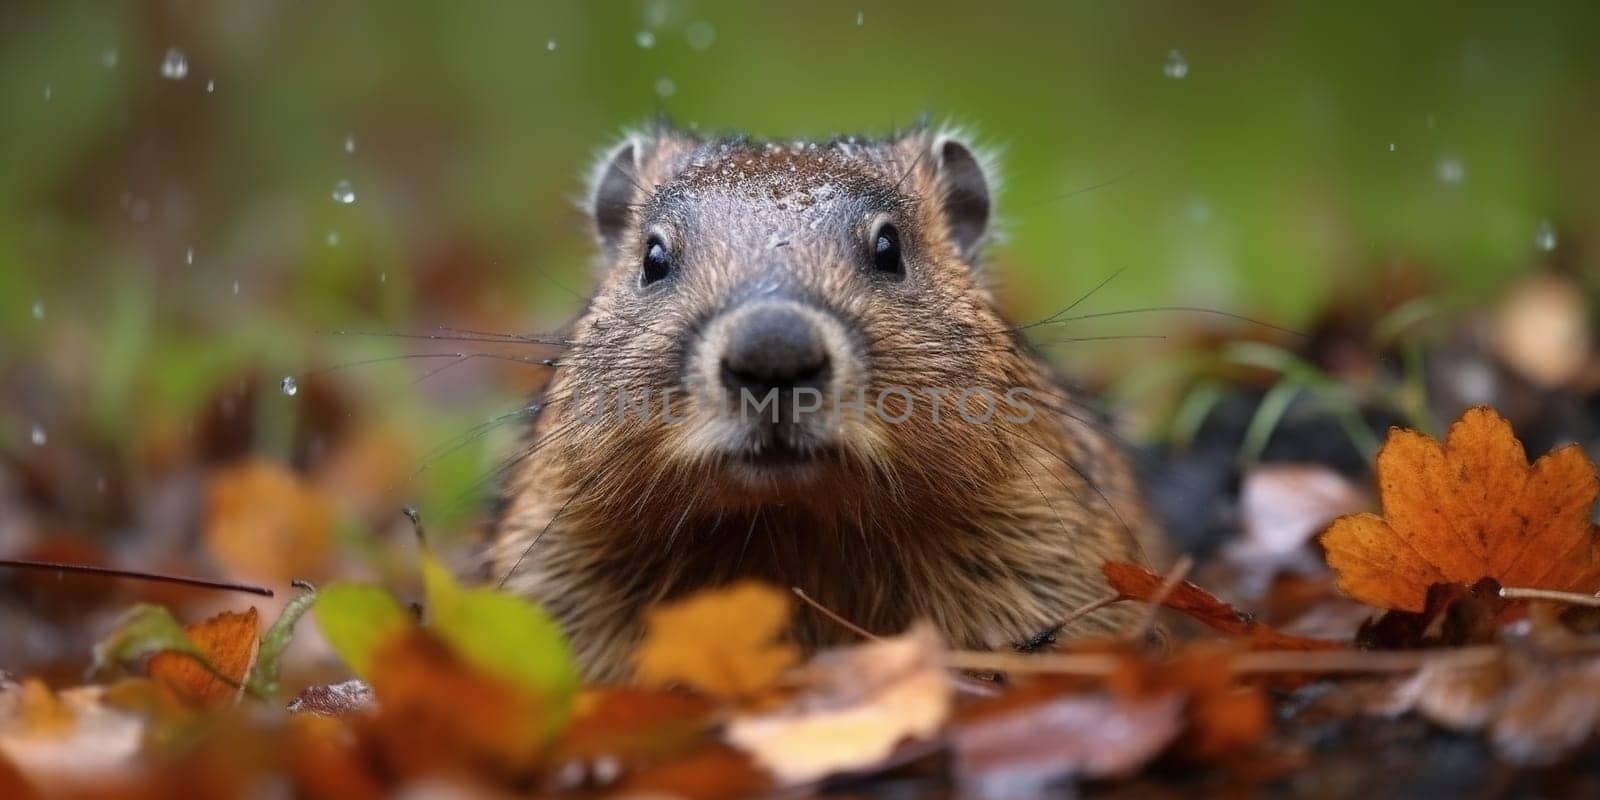 Muzzle Of Beaver In Autumn Pond In The Forest by tan4ikk1